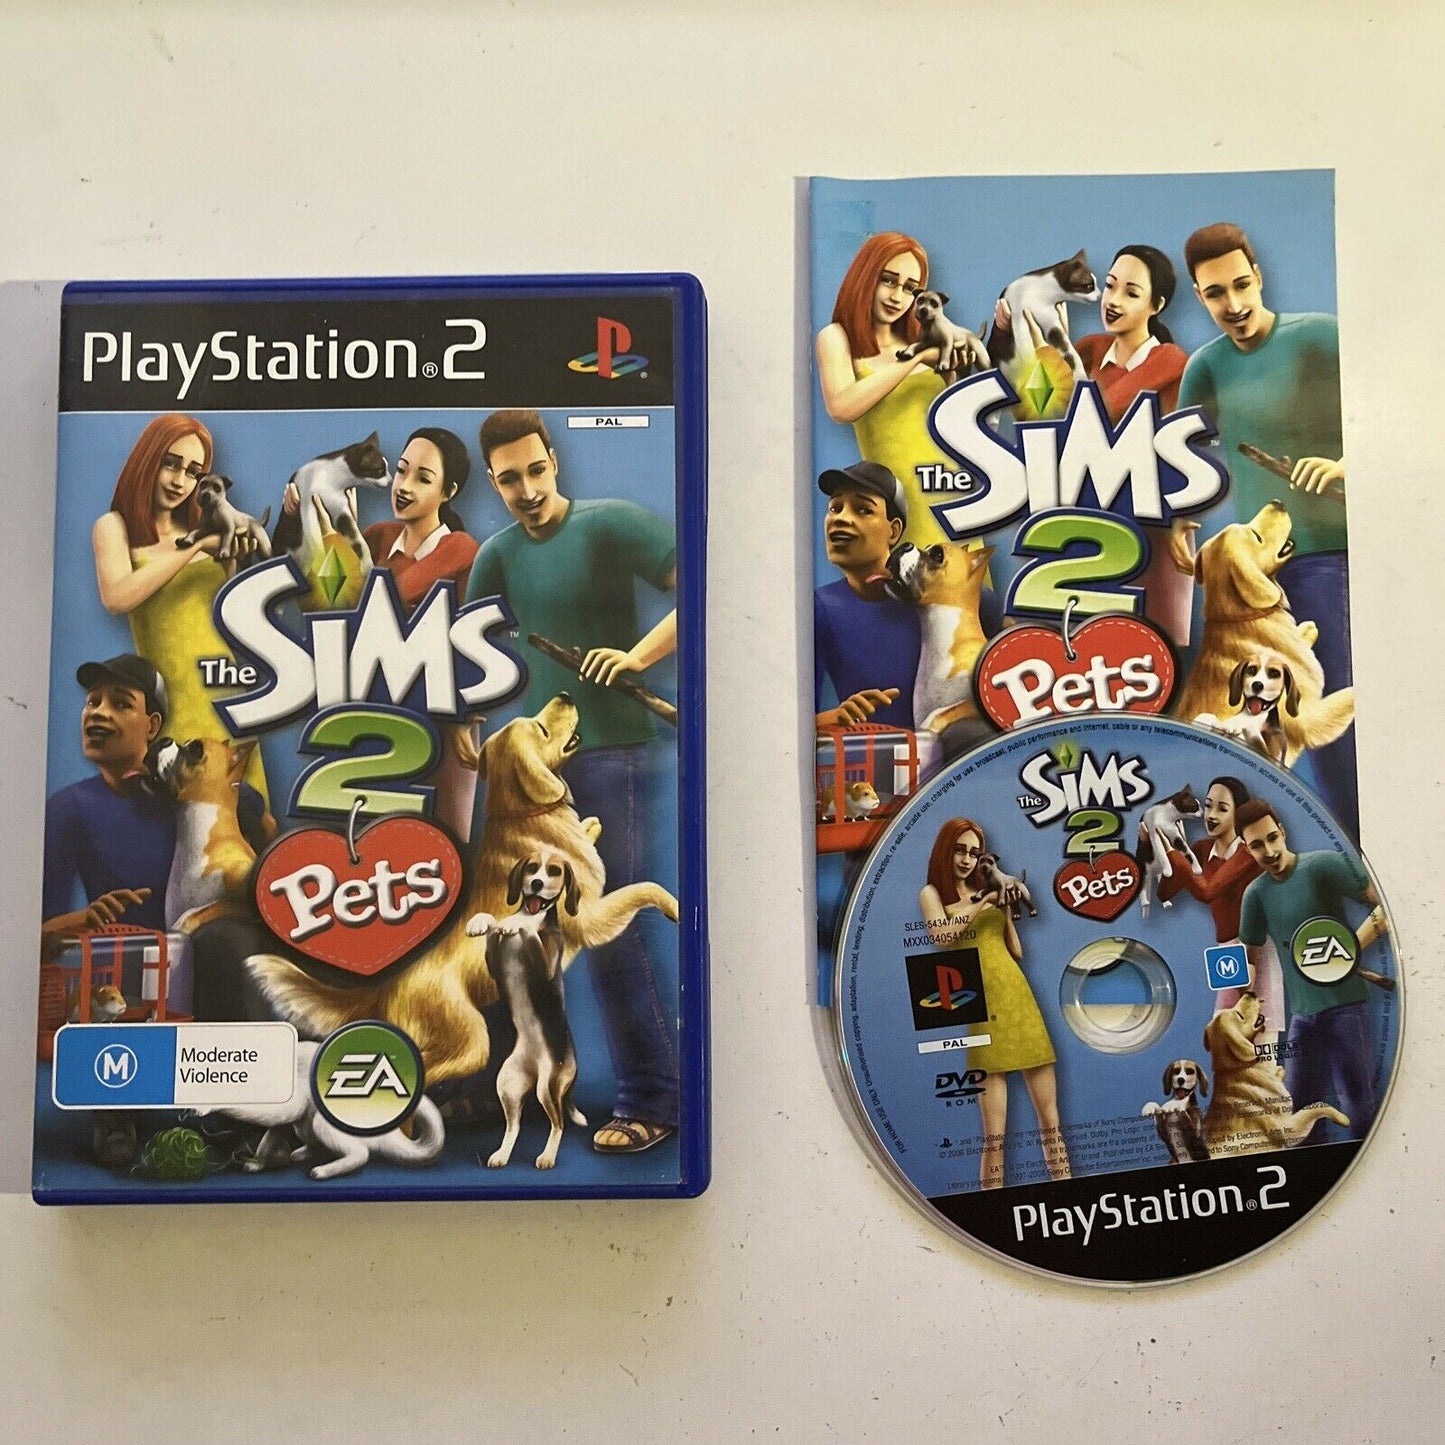 The Sims 2 Pets - PS2 Playstation 2 PAL Game Complete with Manual